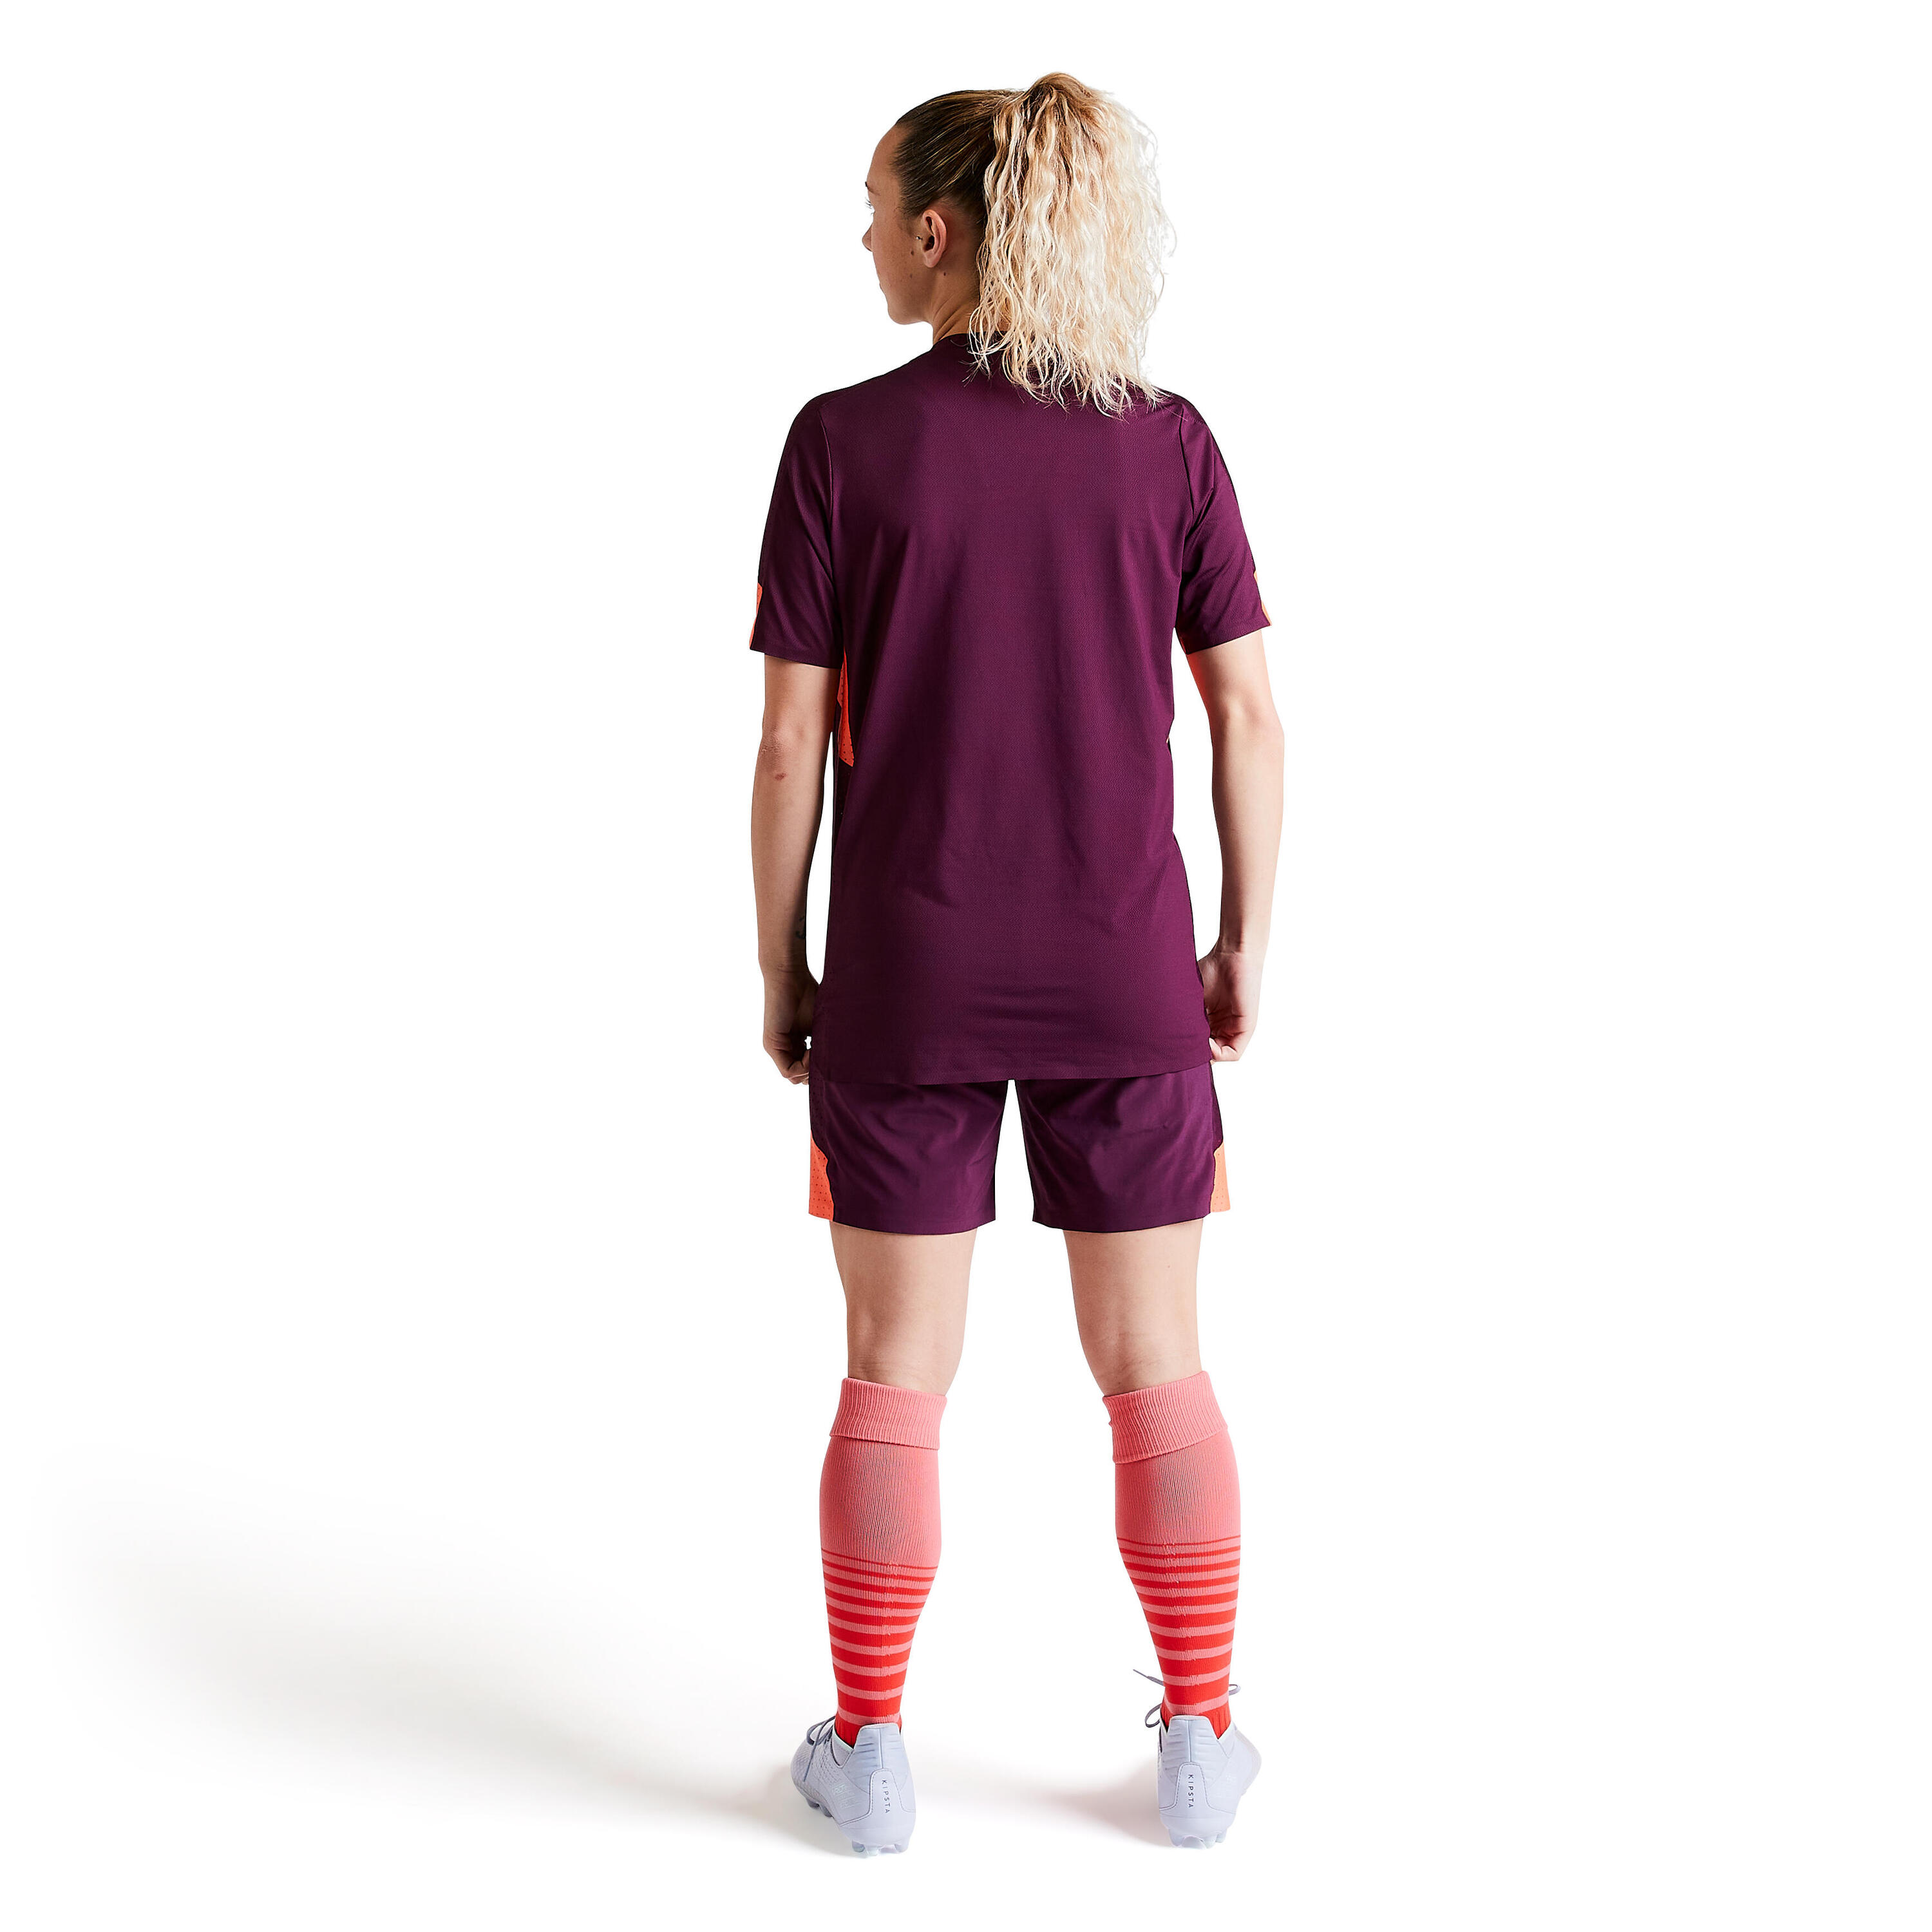 Women's Football Jersey F900 - Coral 26/31